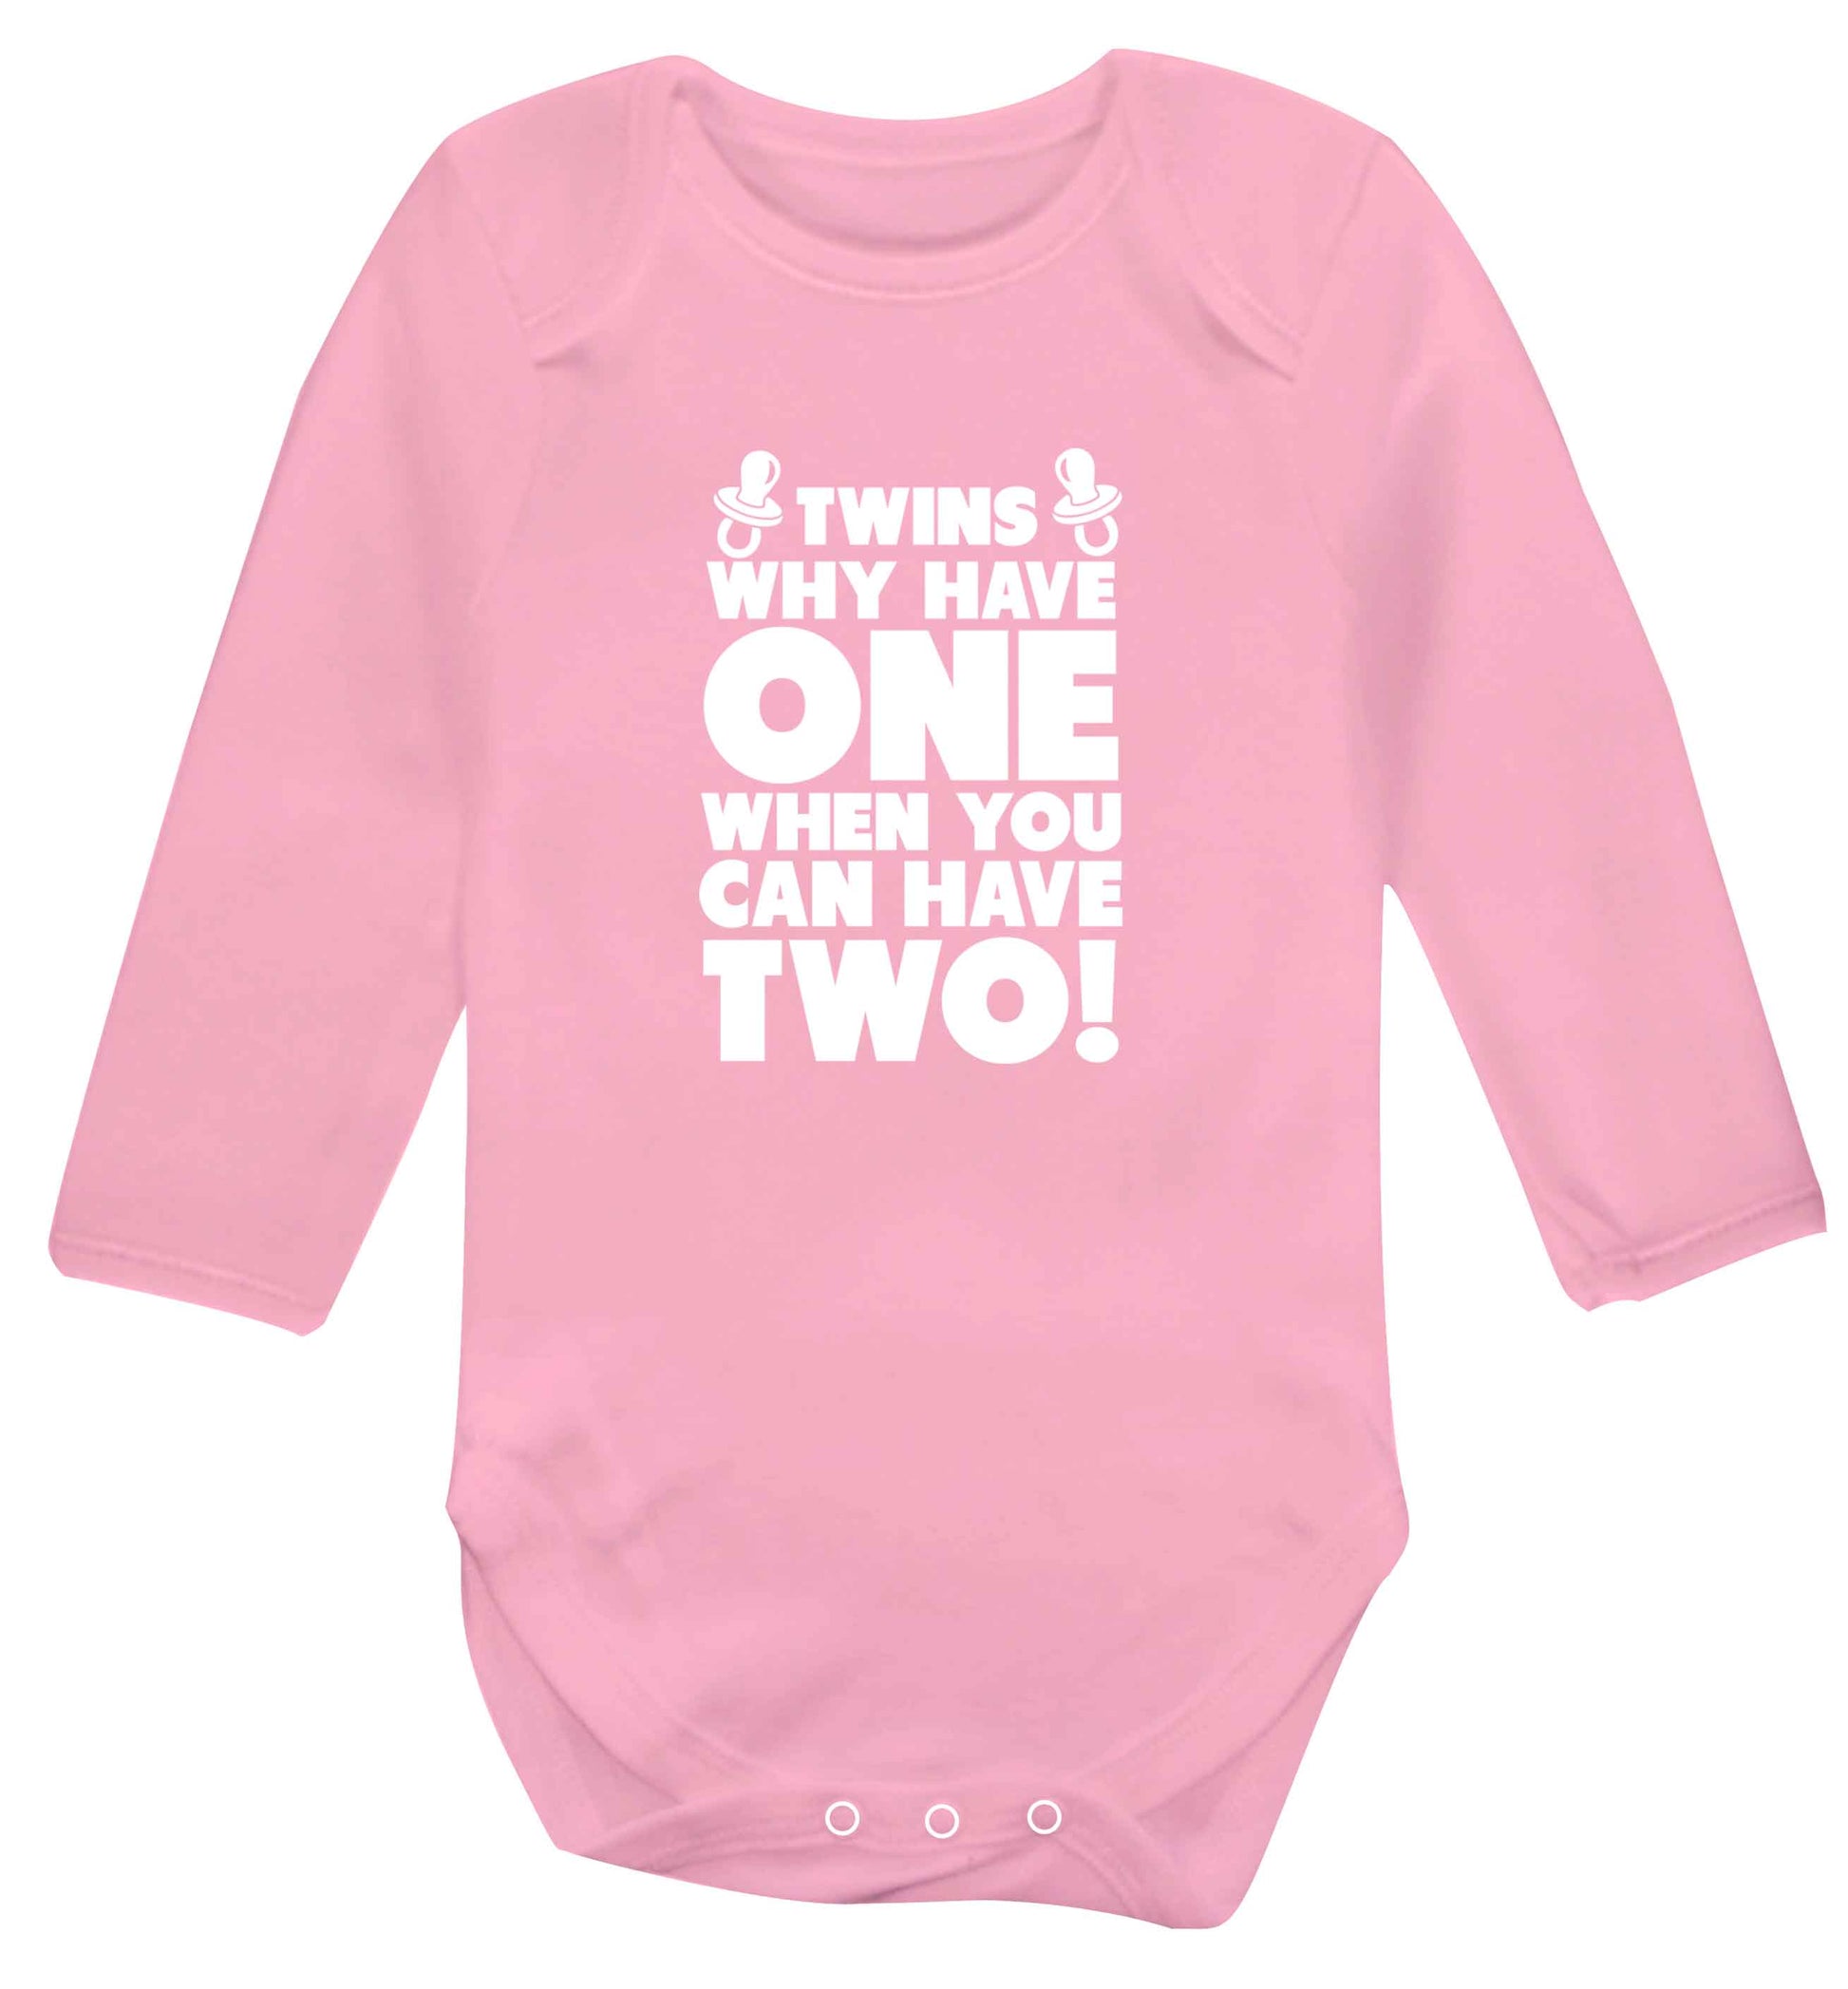 Twins why have one when you can have two baby vest long sleeved pale pink 6-12 months